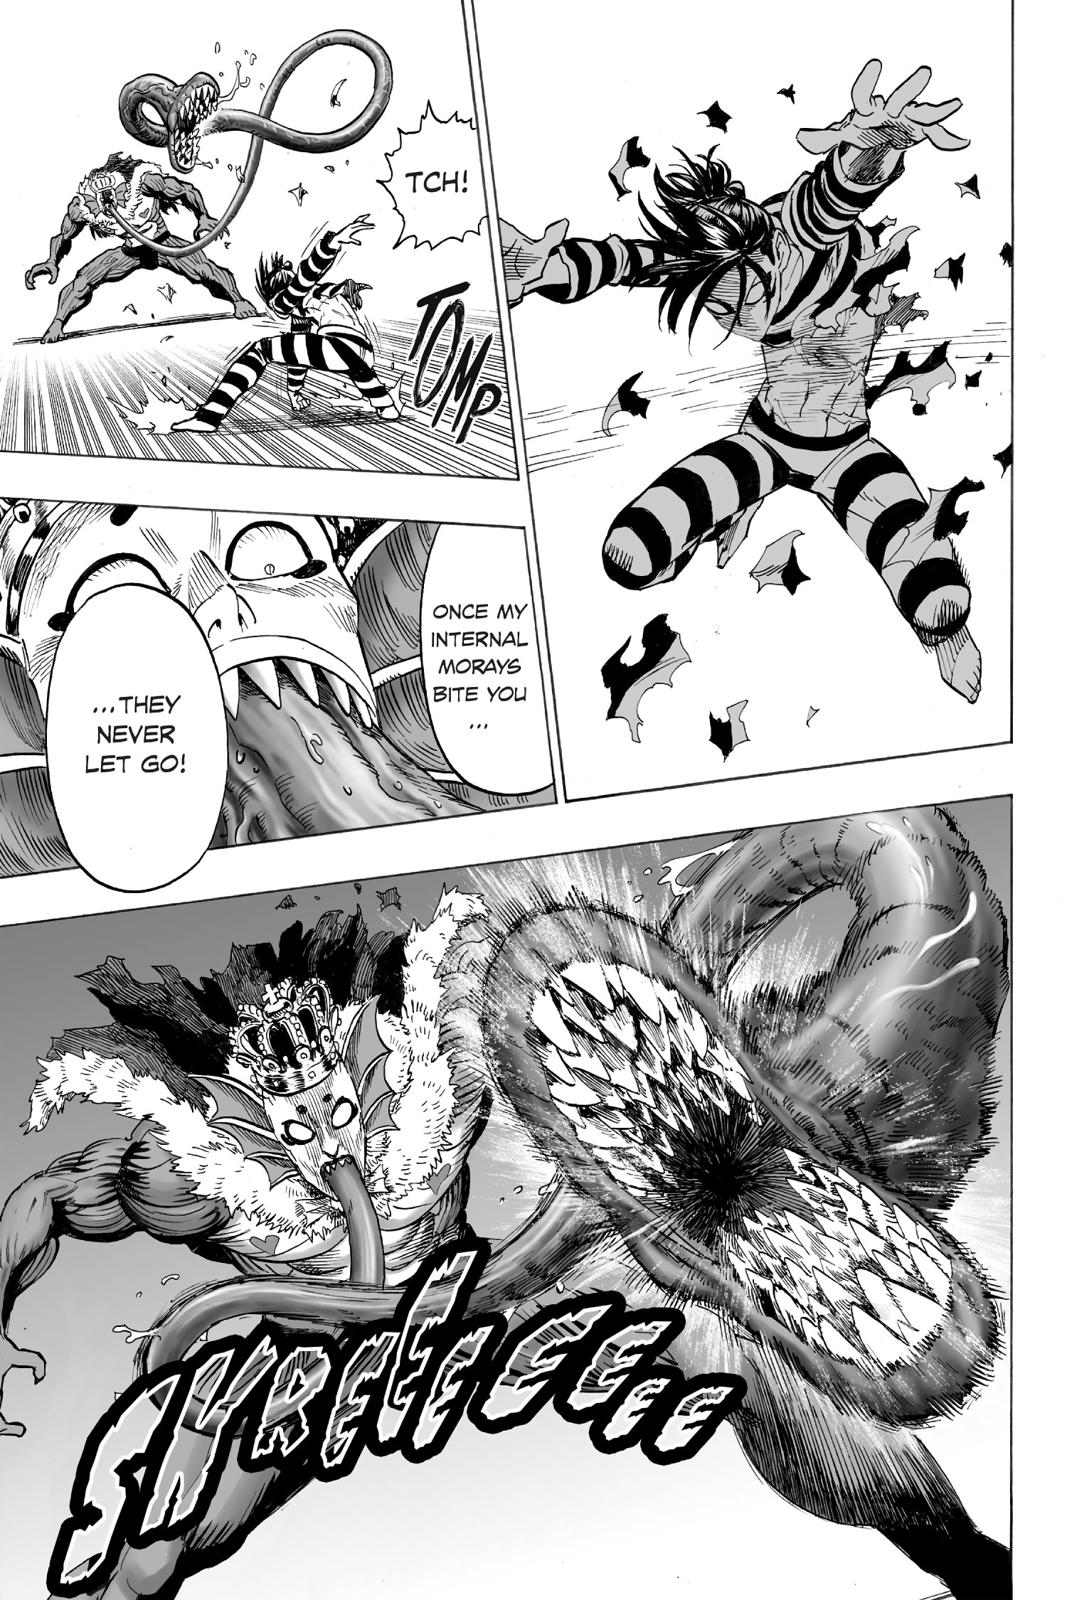 One-Punch Man, Punch 25 image 37